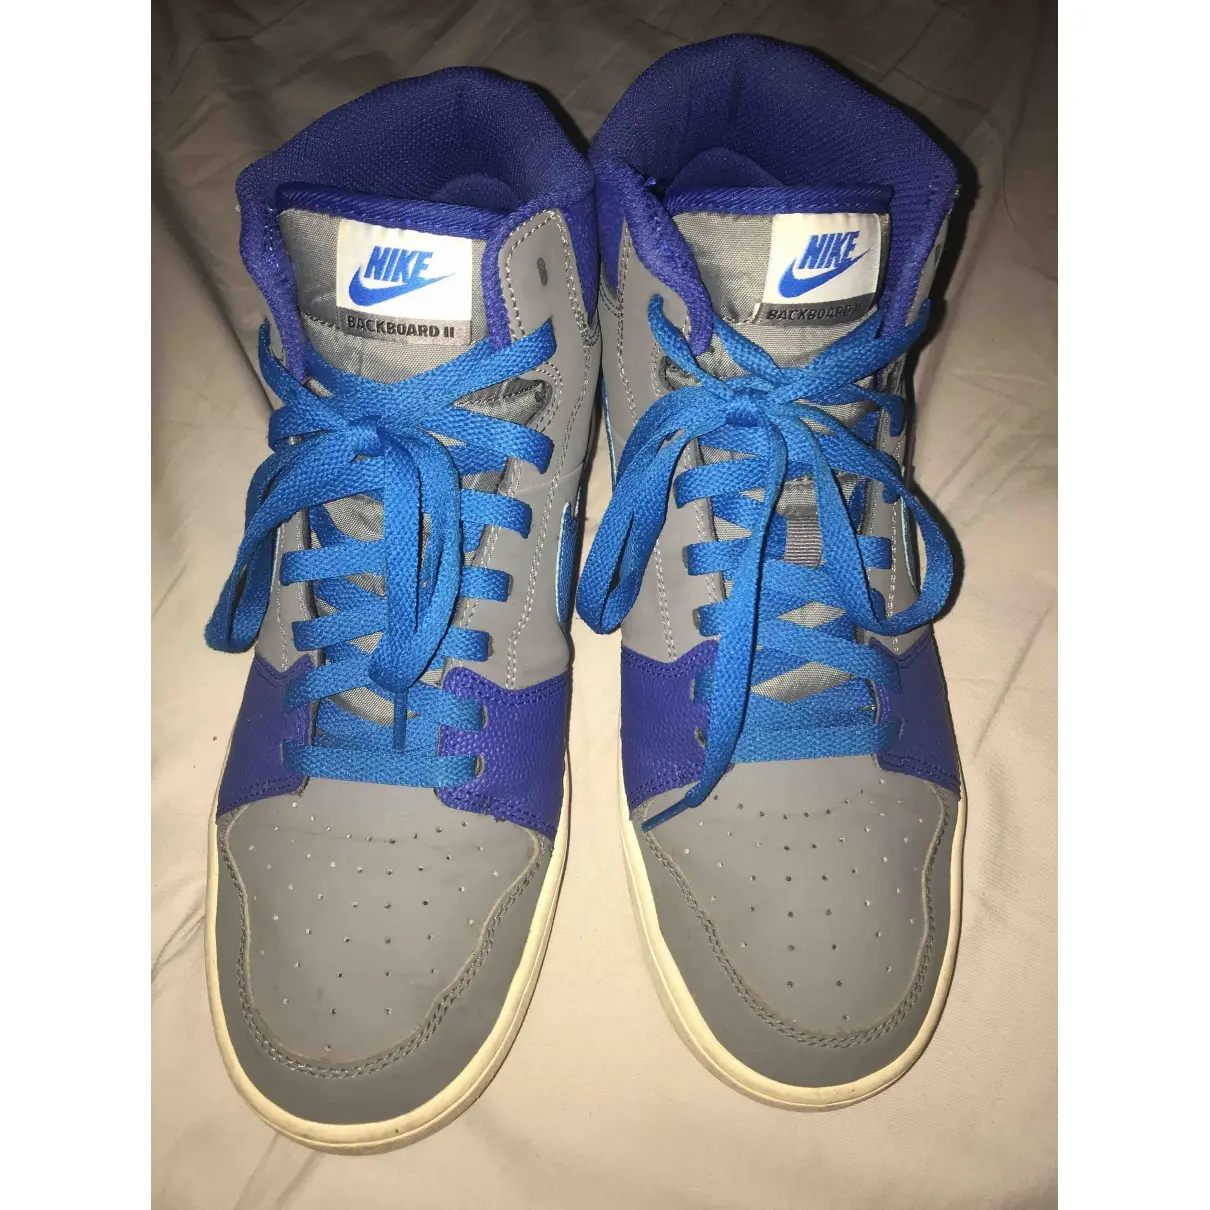 Nike High trainers for sale